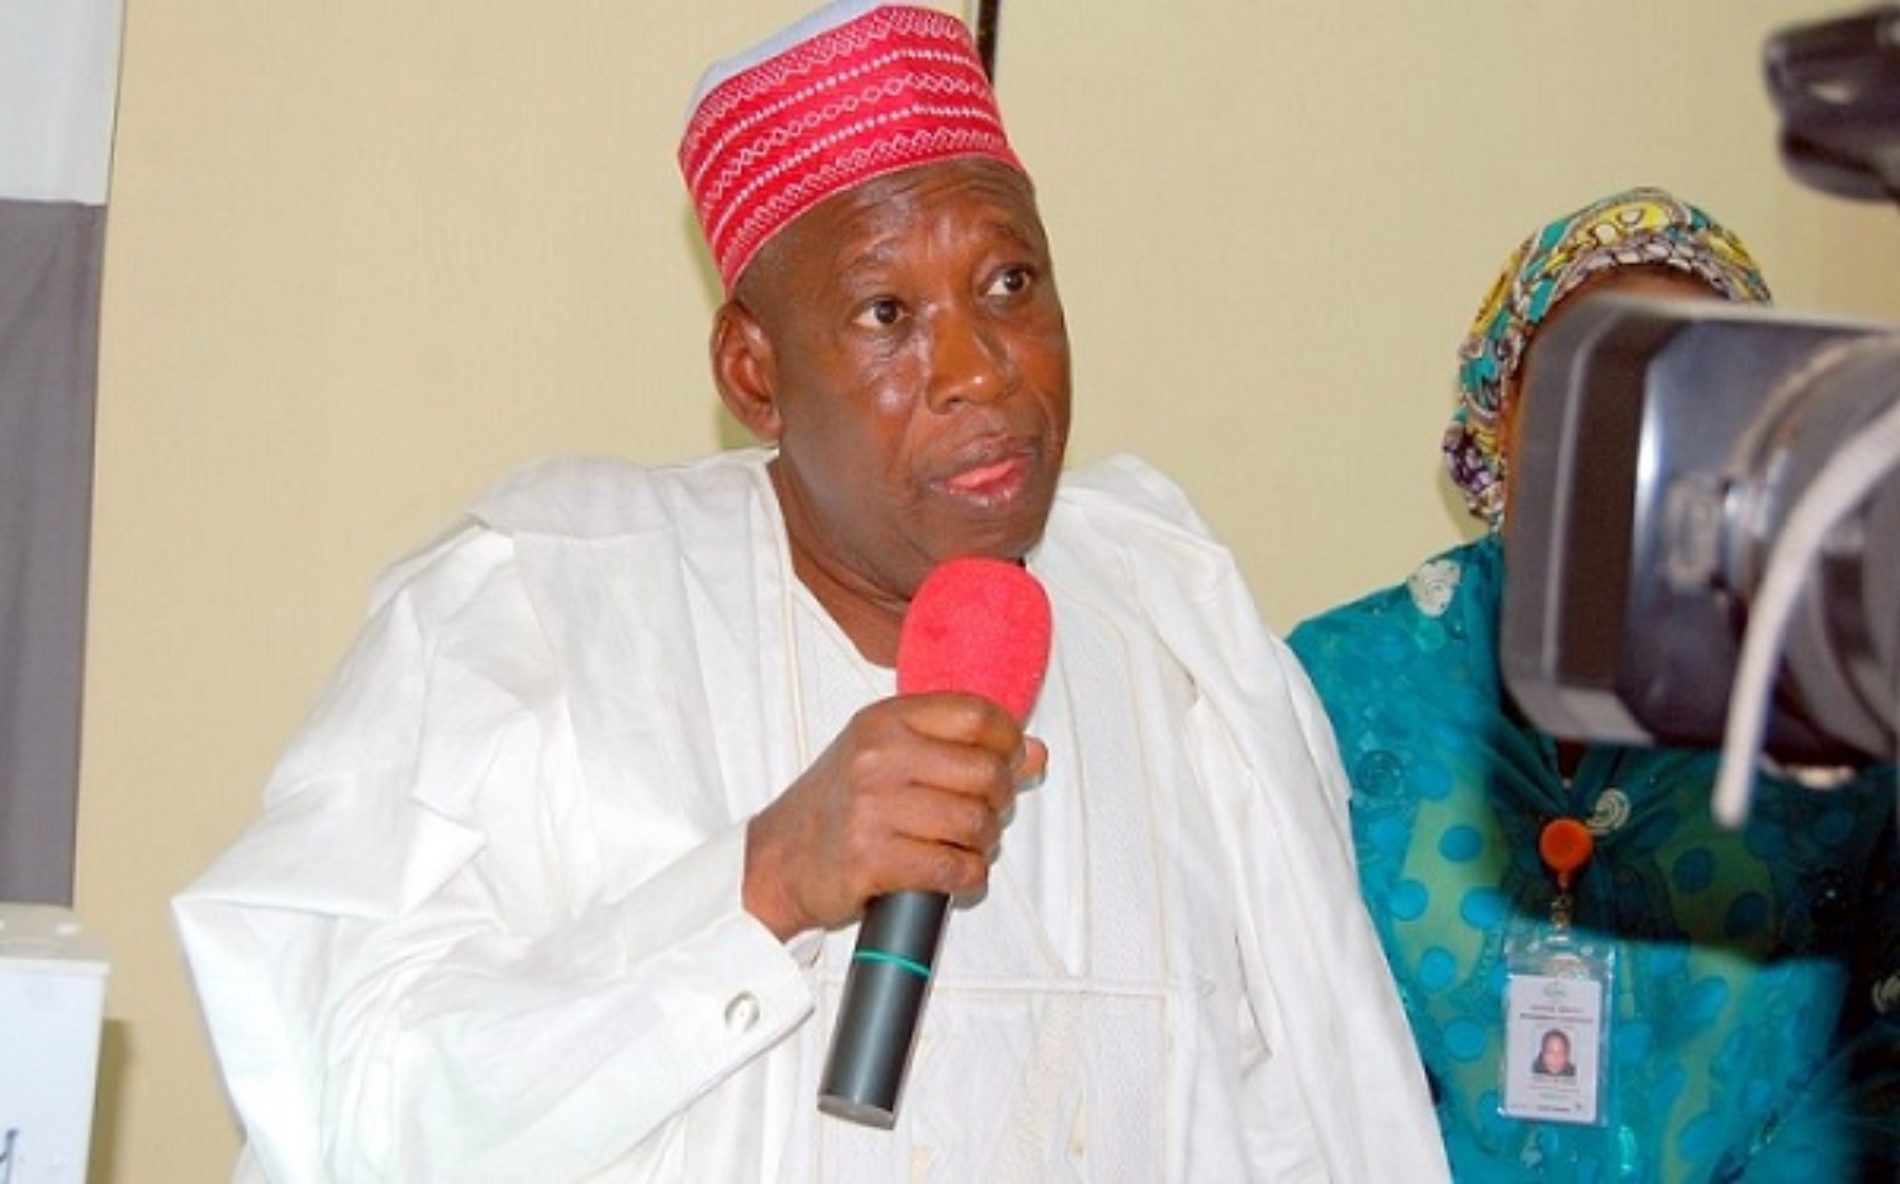 Kano State Government Shuts Down College Over Claims Of Homosexual Acts